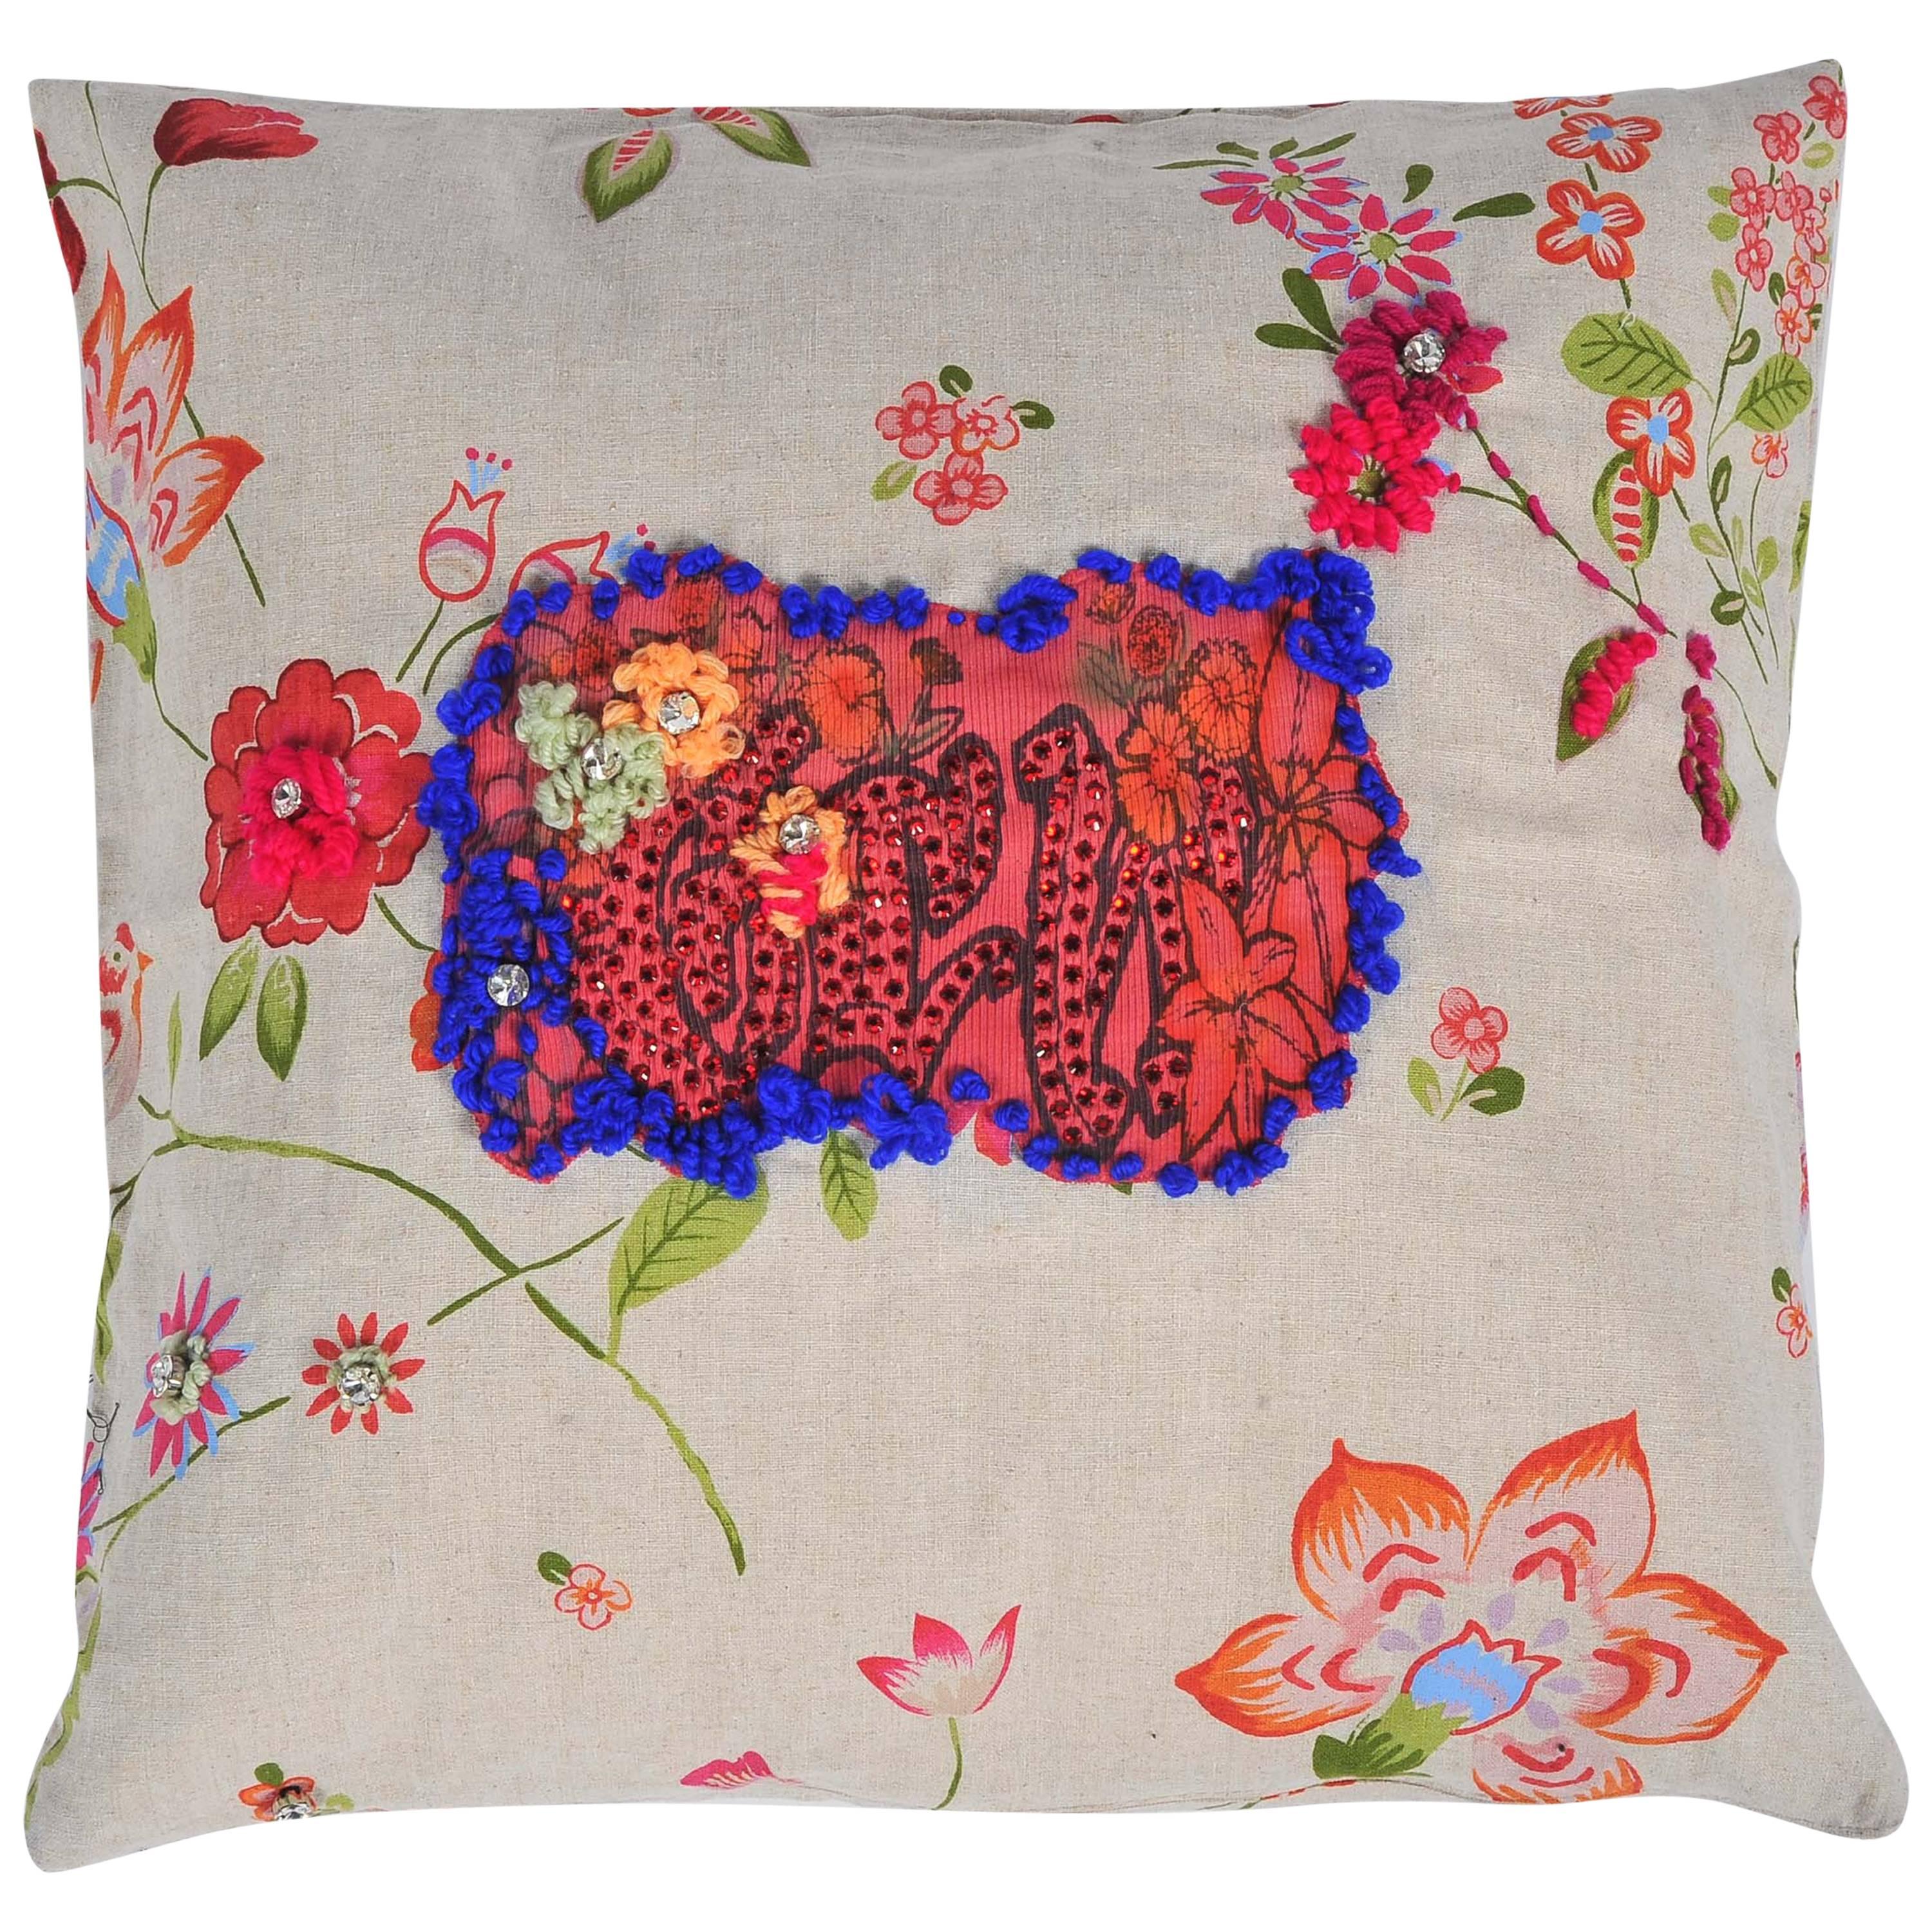 Unique Handmade Bohemian Colourful Floral Patterned Small Cushion For Sale